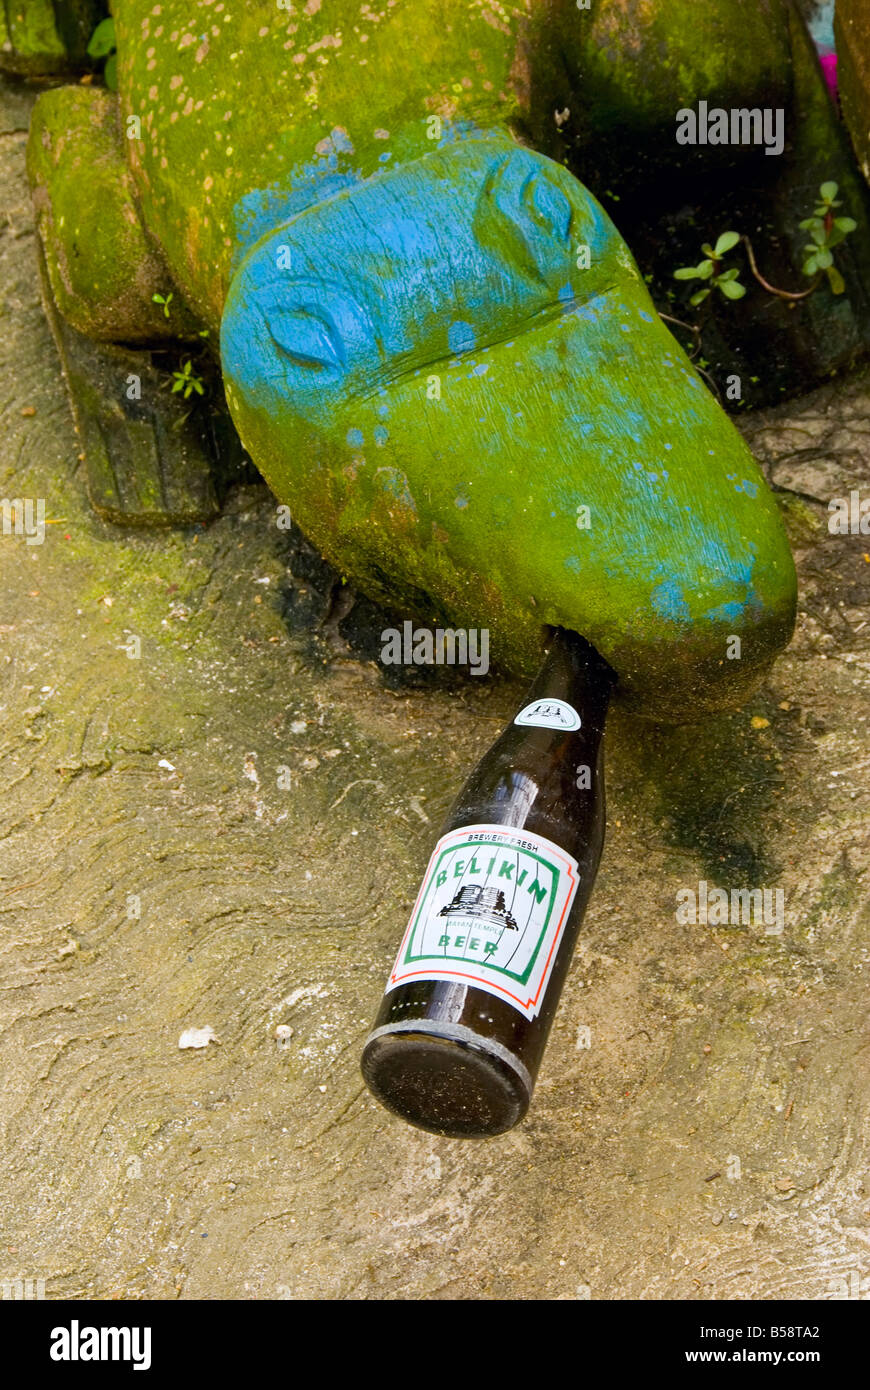 Belize City green stone alligator blue eyes bottle local Belikin beer in mouth humor humour odd funny Stock Photo